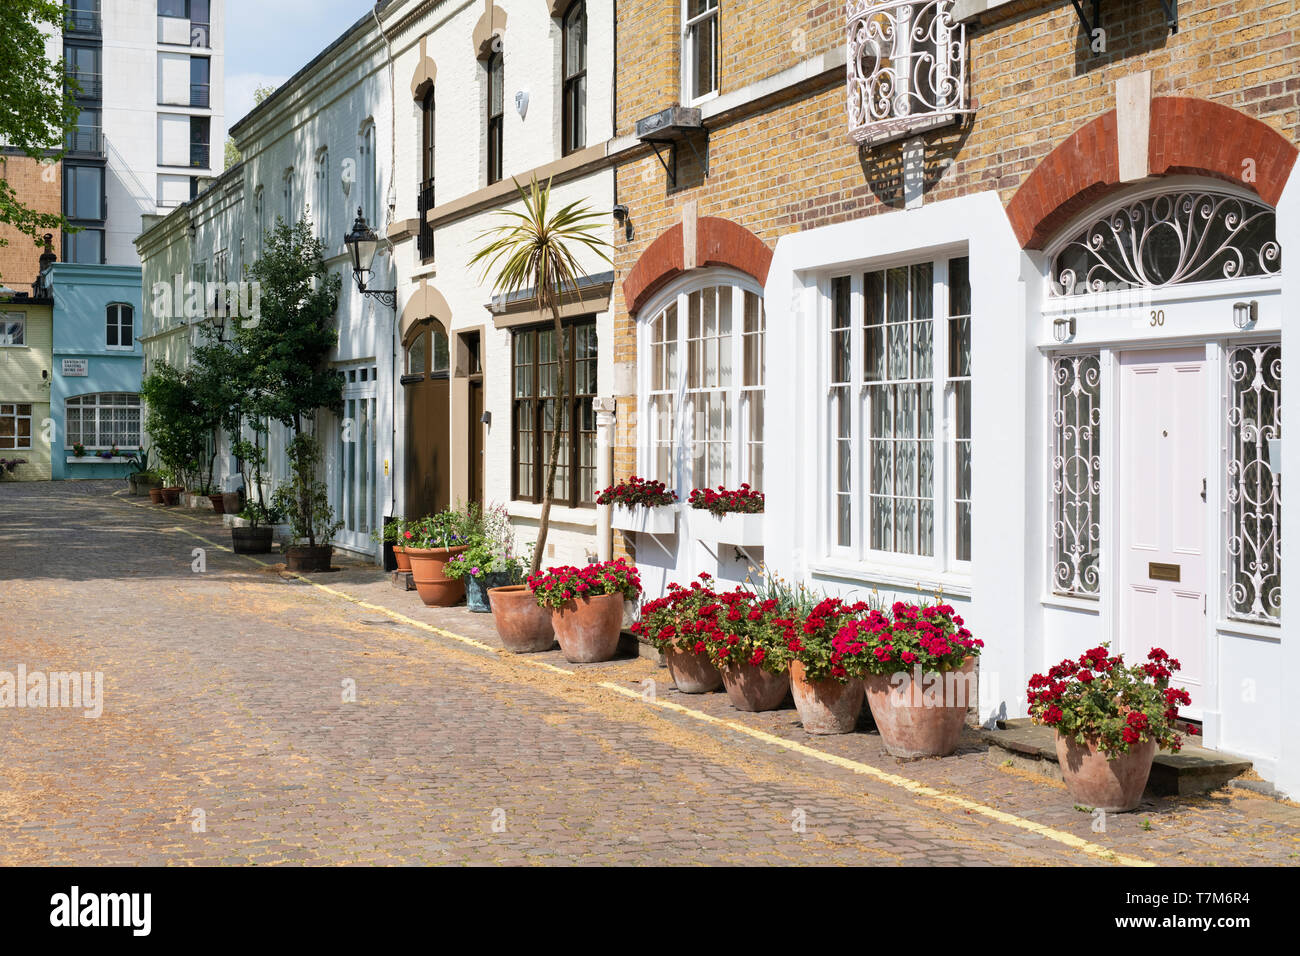 Flower pots outside houses in Ennismore Gardens Mews, South Kensington, City of Westminster, London. England Stock Photo